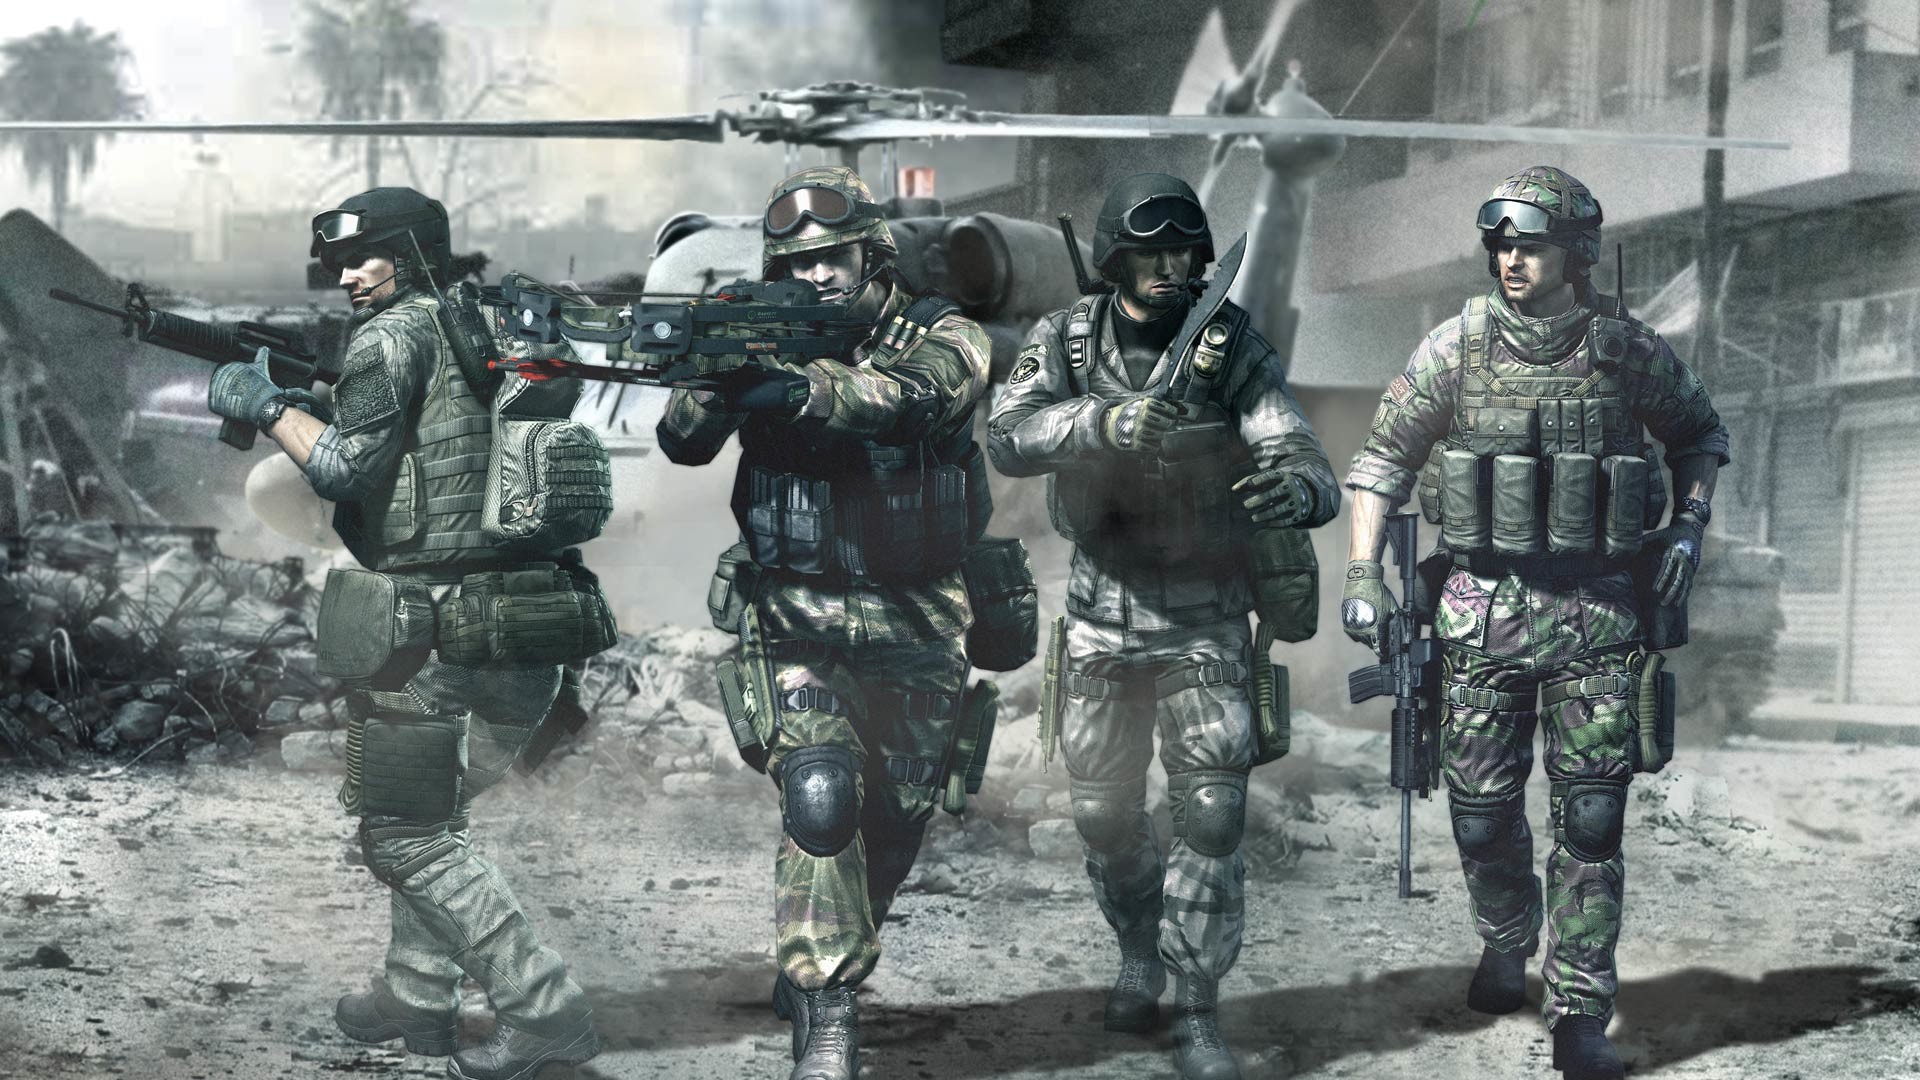 1920x1080 Hd Special Forces Wallpapers Card 5 of 5hd special 